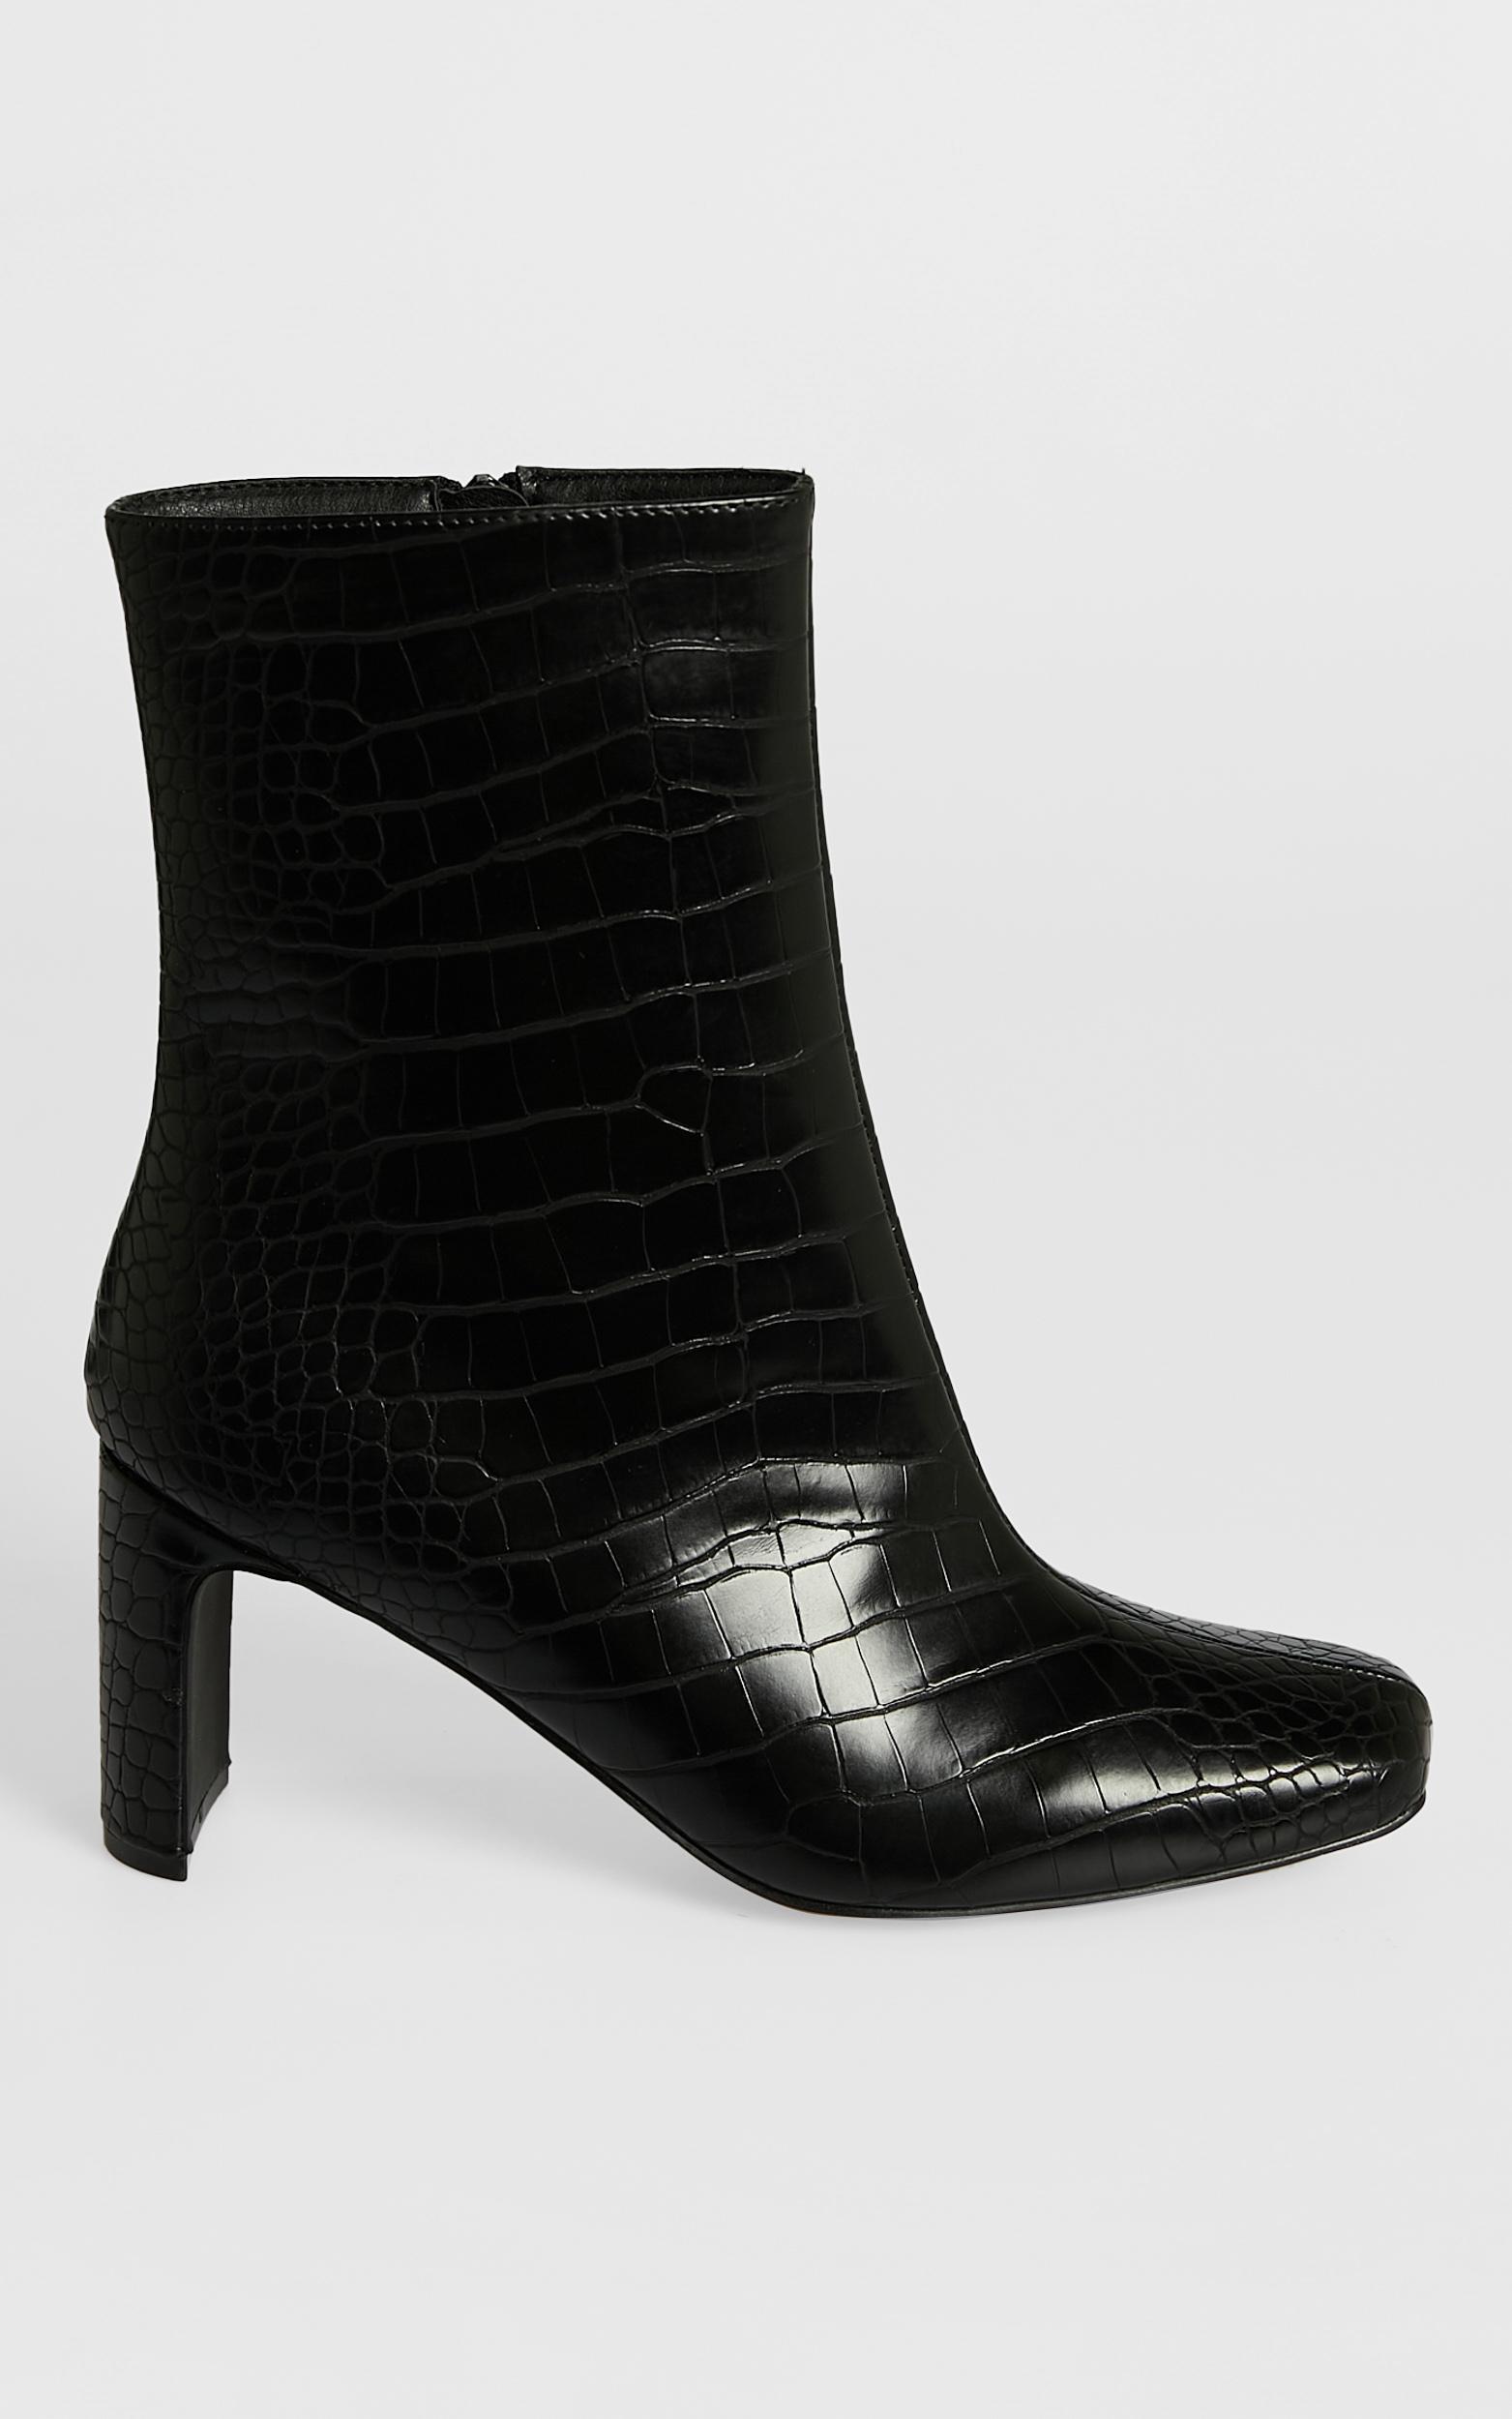 Therapy - Zinnia Boots in Black Croc - 05, BLK1, hi-res image number null